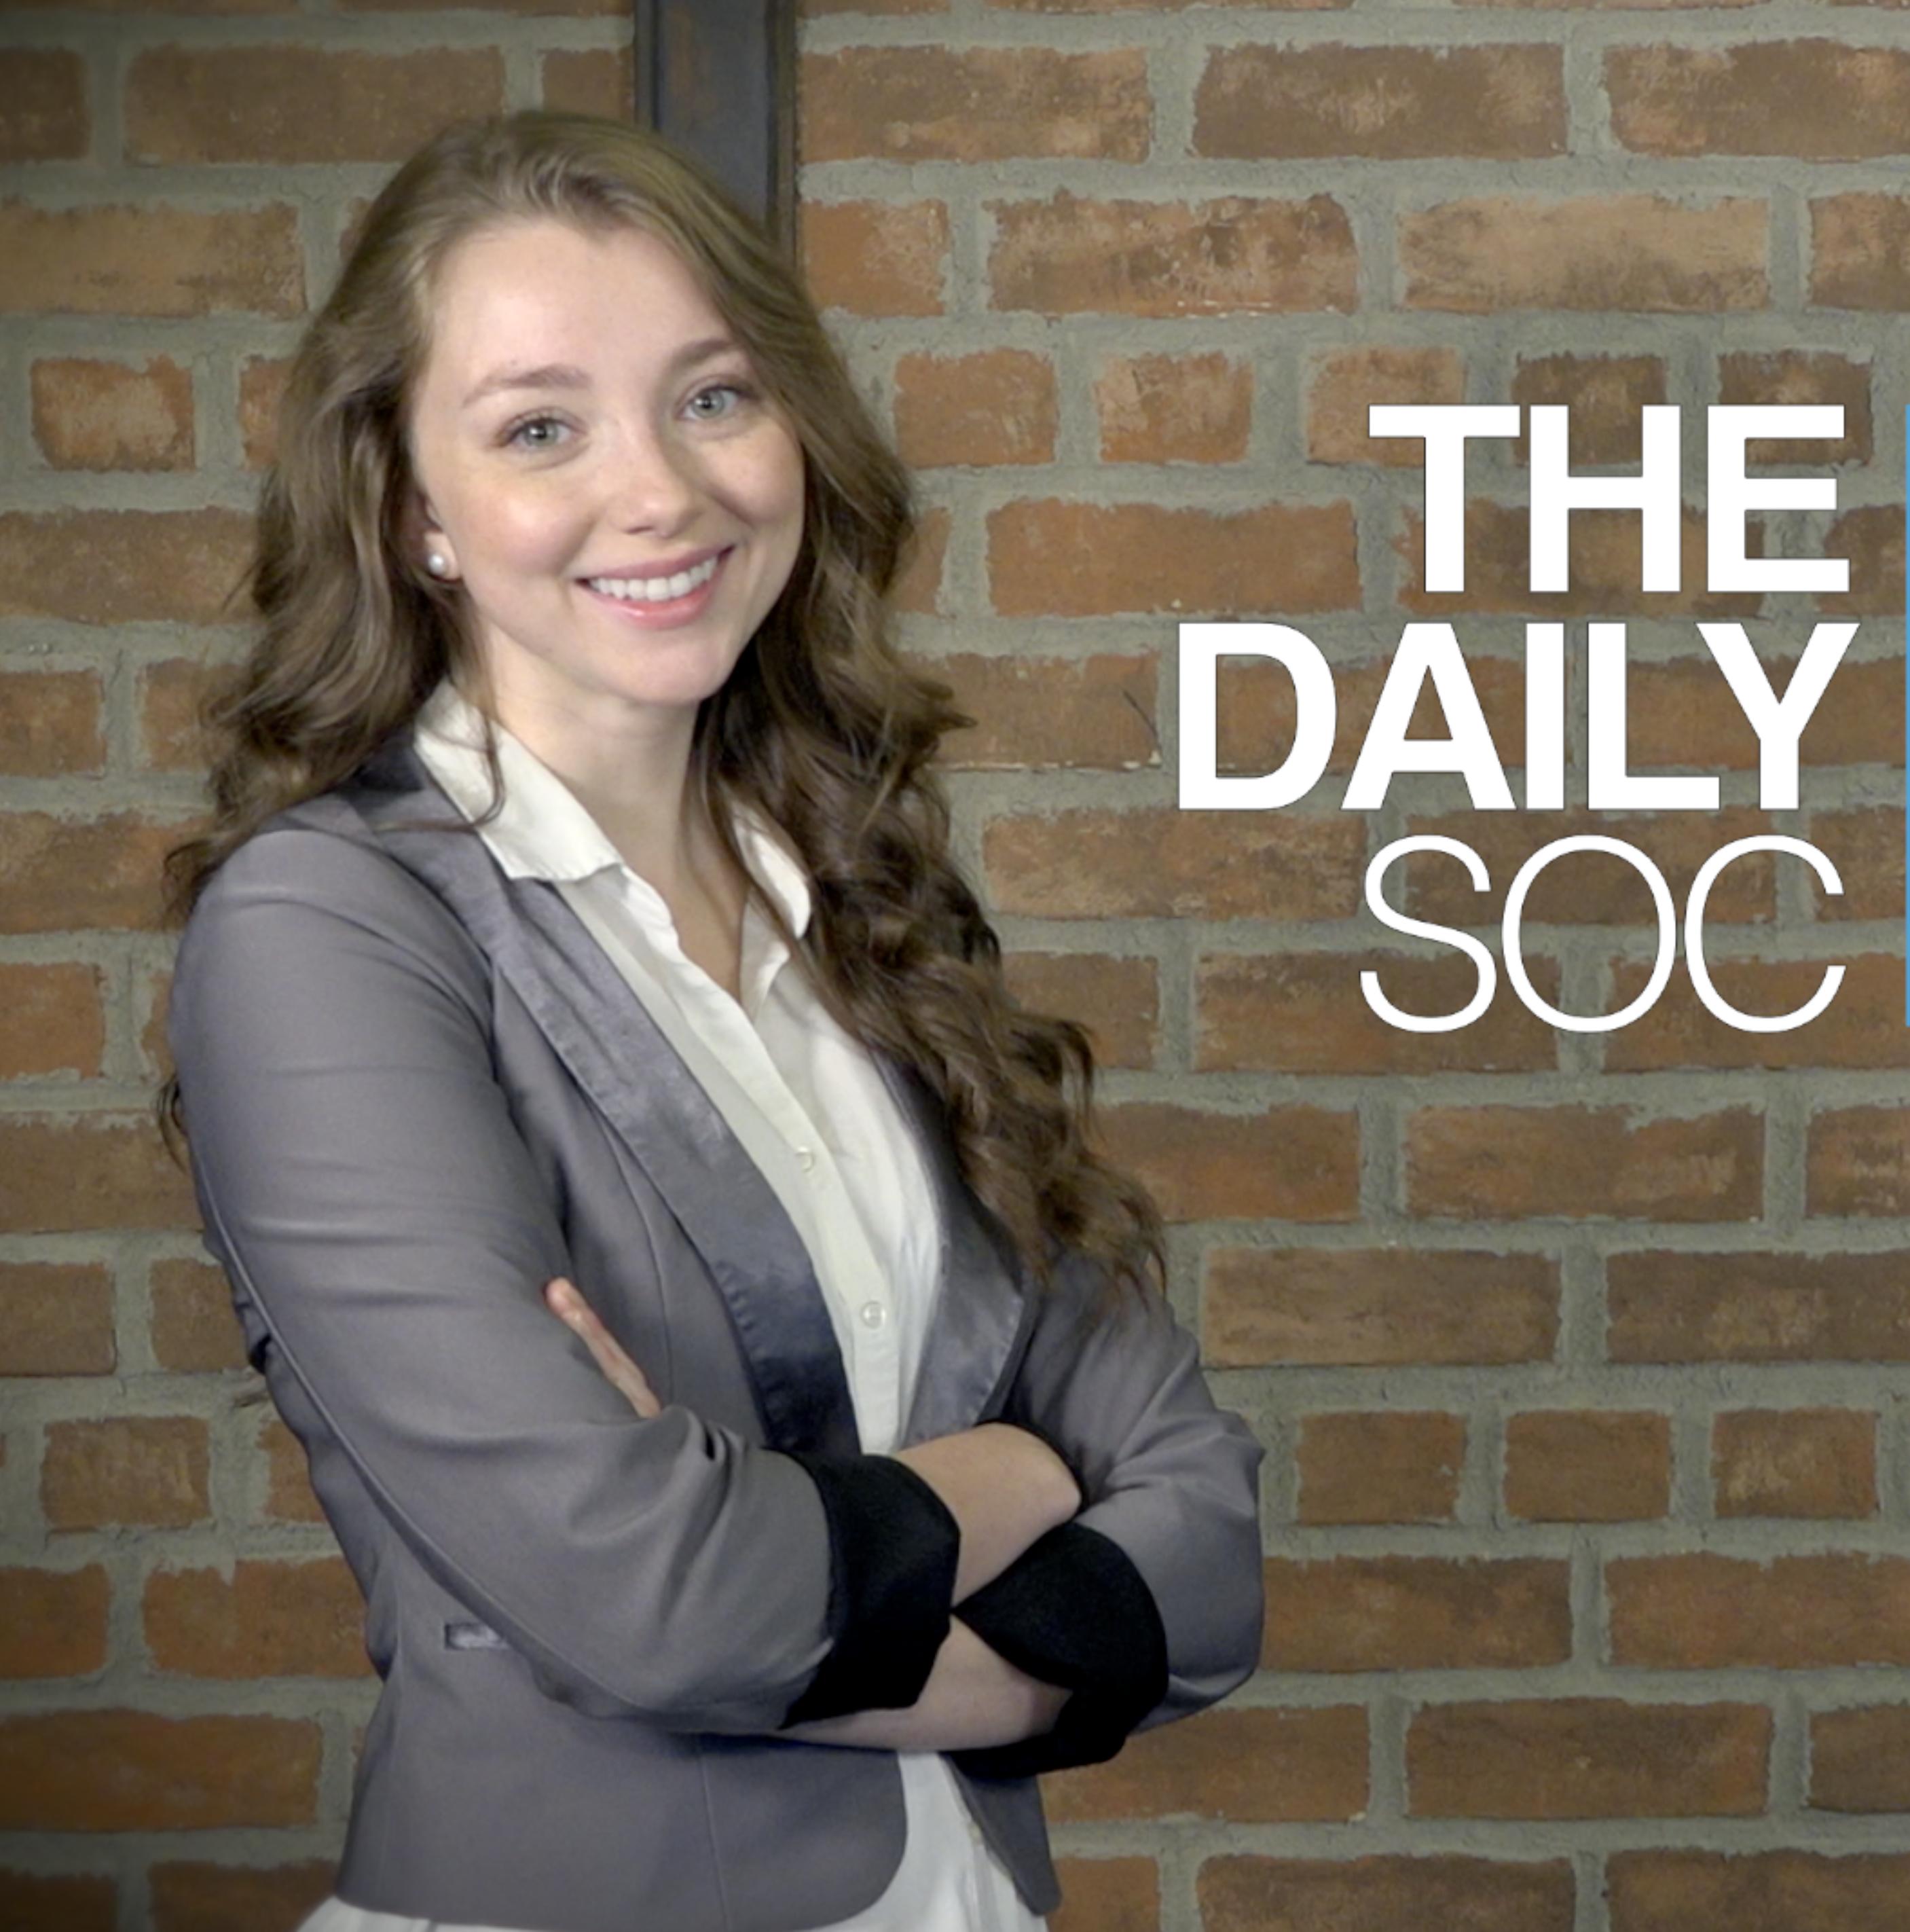 The Daily SOC